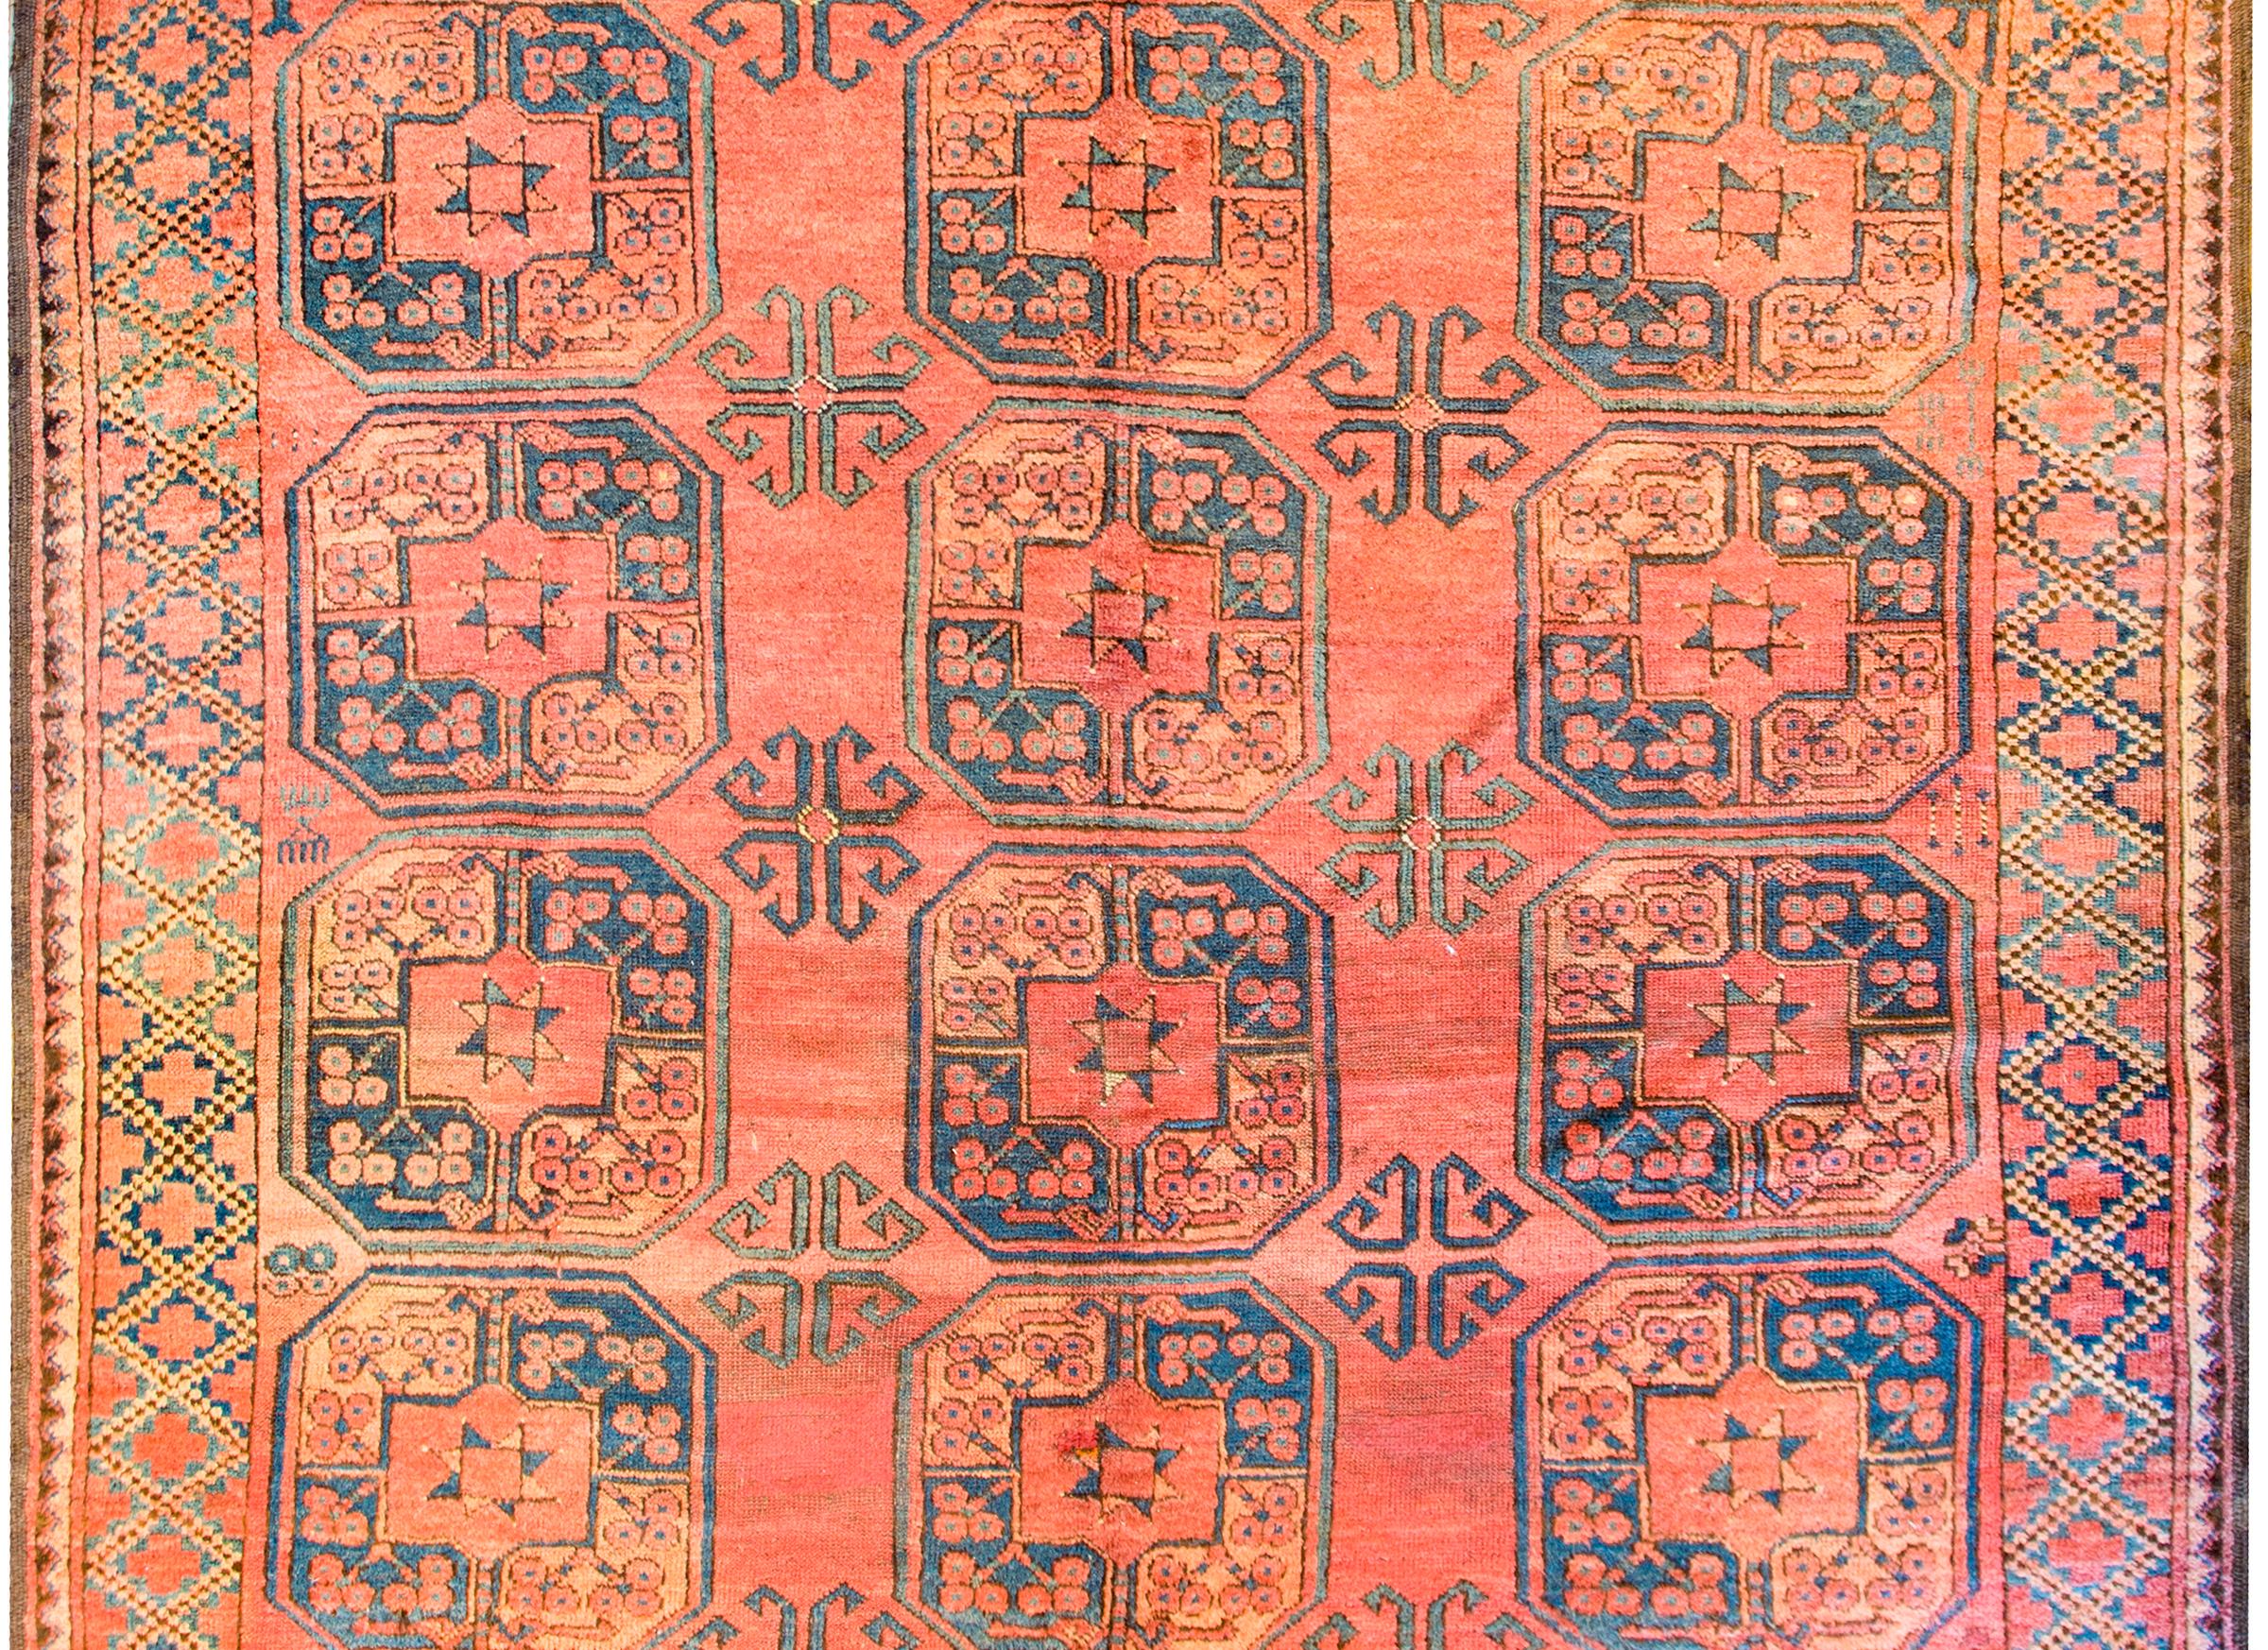 An early 20th century Afghani Bashir rug with multiple large octagonal medallions woven in indigo and gold, on an orange background surrounded by a complementary geometric lattice pattern border.